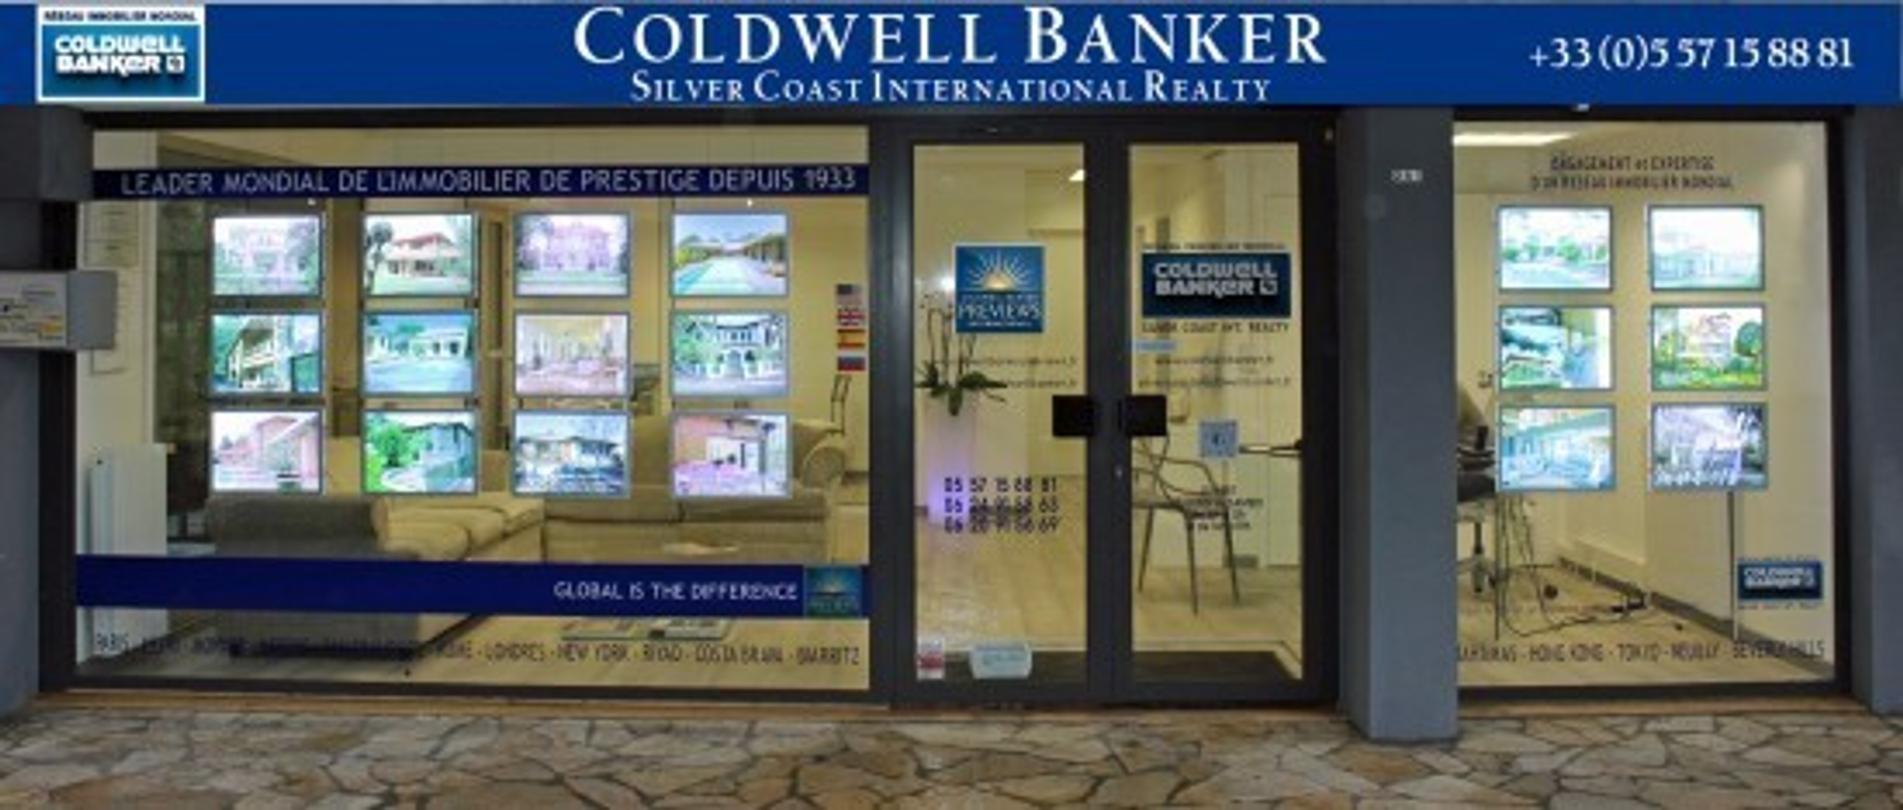 agence coldewell banker